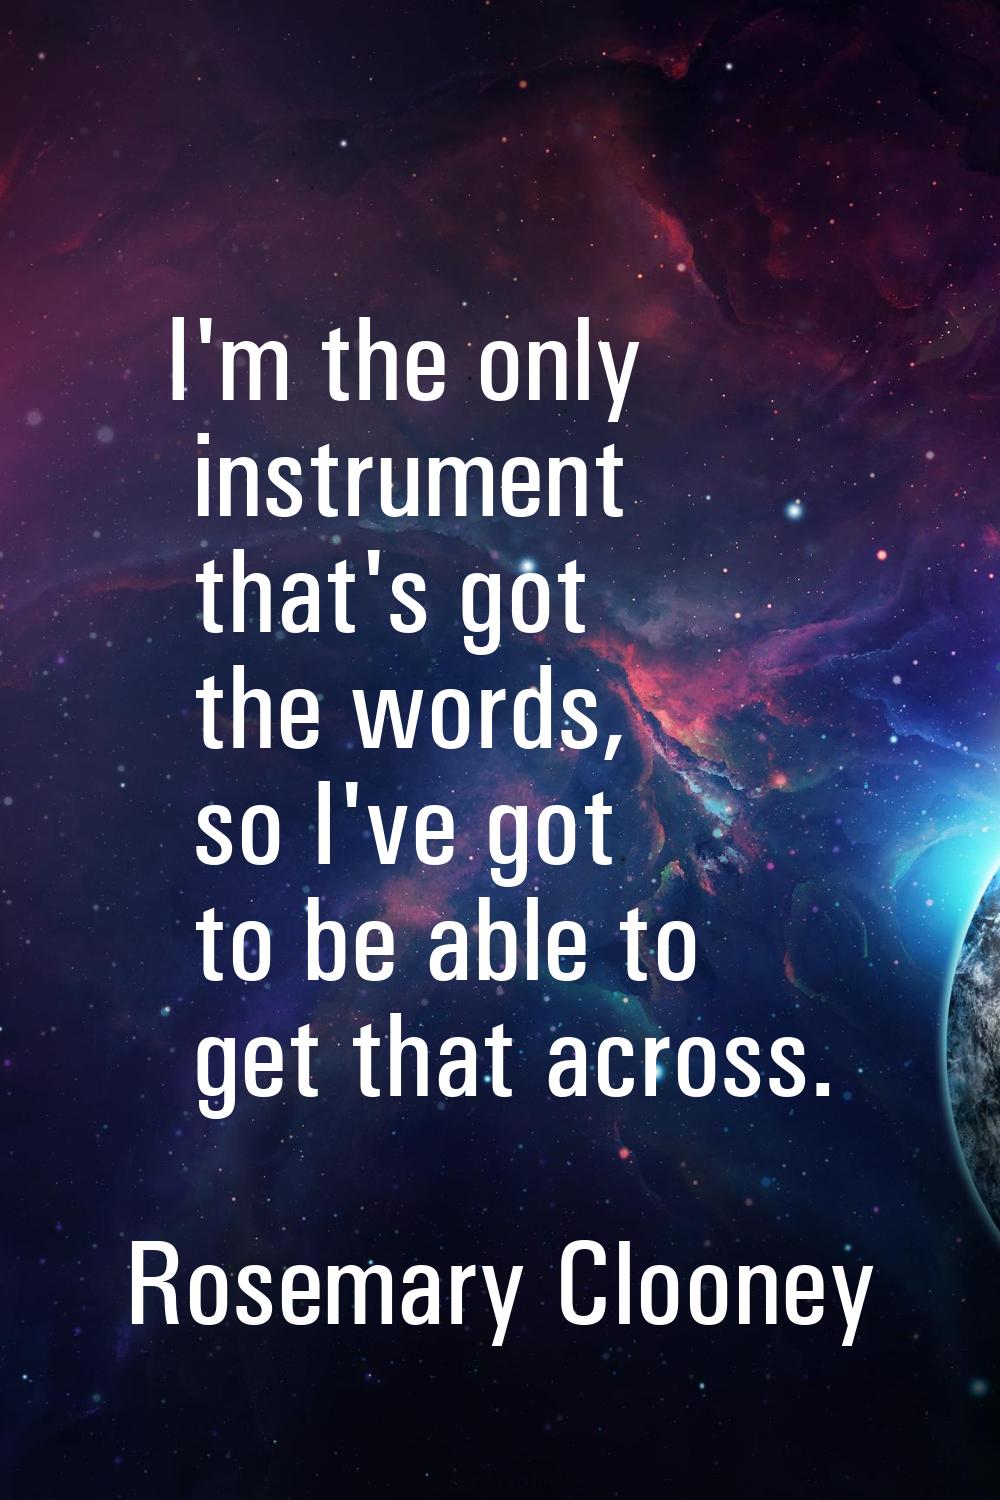 I'm the only instrument that's got the words, so I've got to be able to get that across.